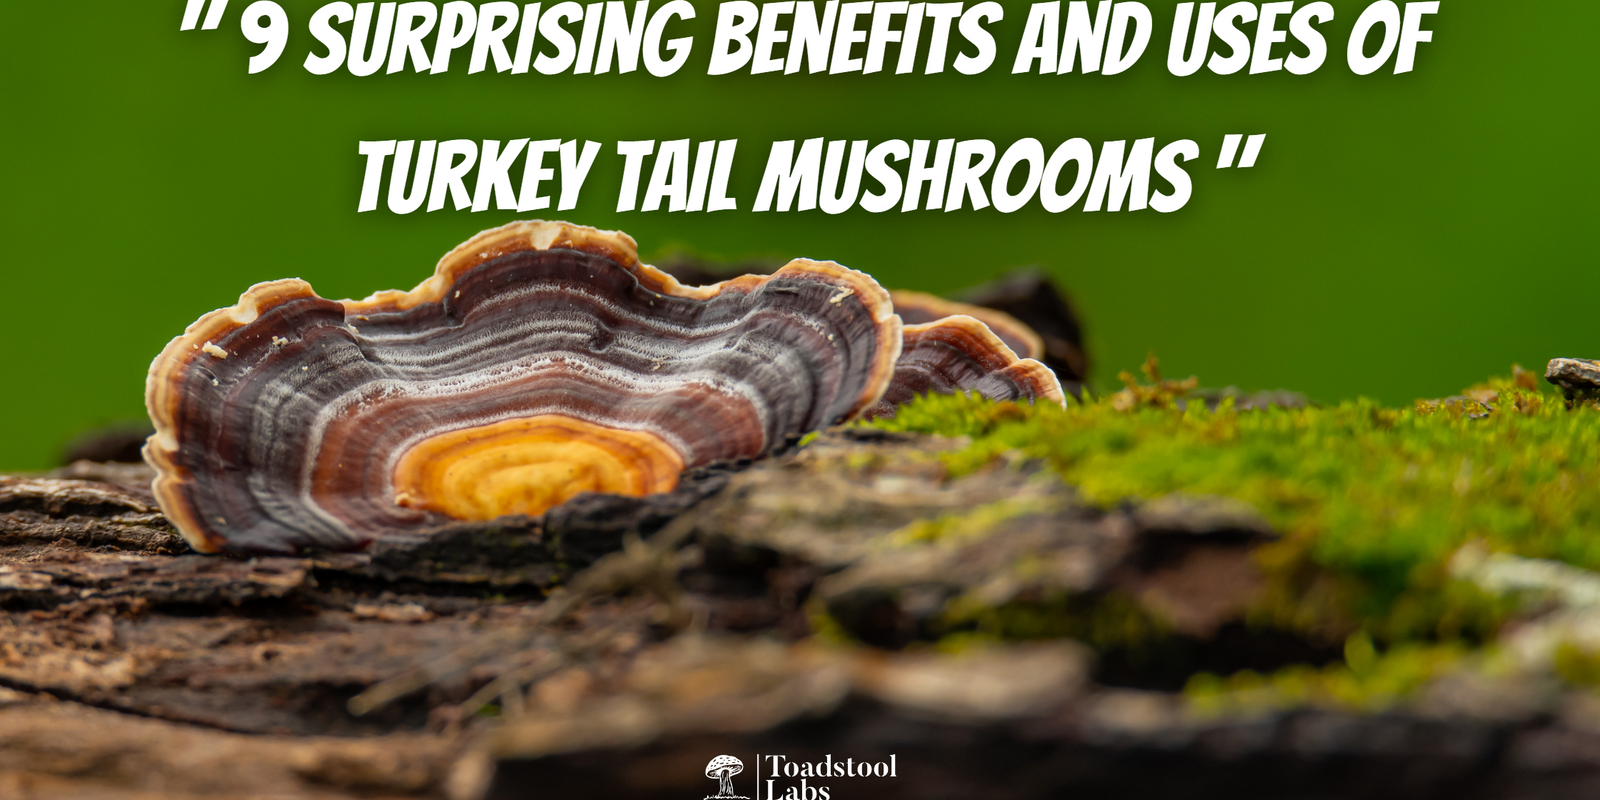 "9 Surprising Benefits and Uses of Turkey Tail Mushrooms"